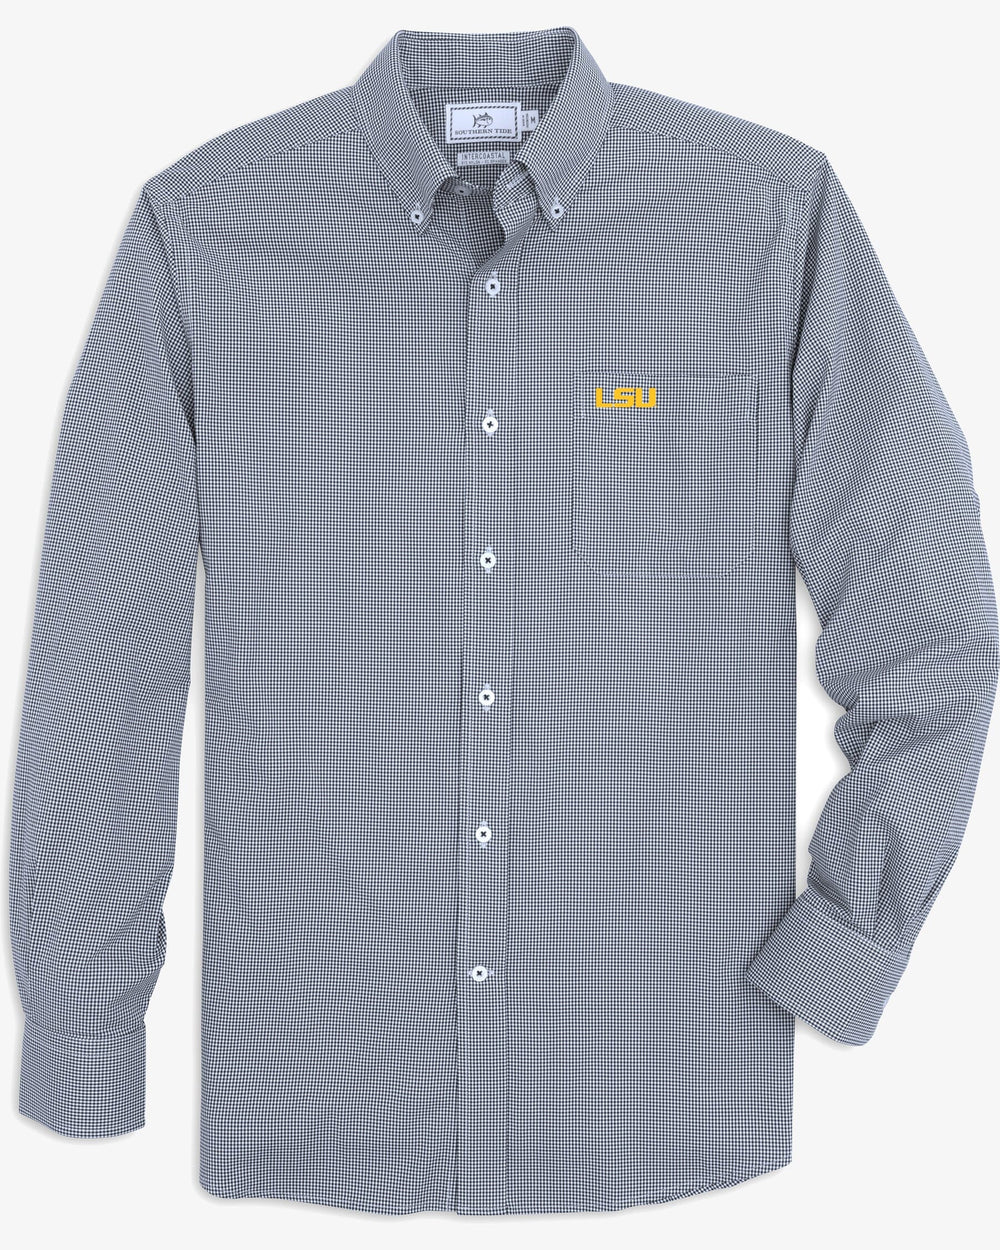 The front view of the LSU Tigers Gingham Button Down Shirt by Southern Tide - Navy